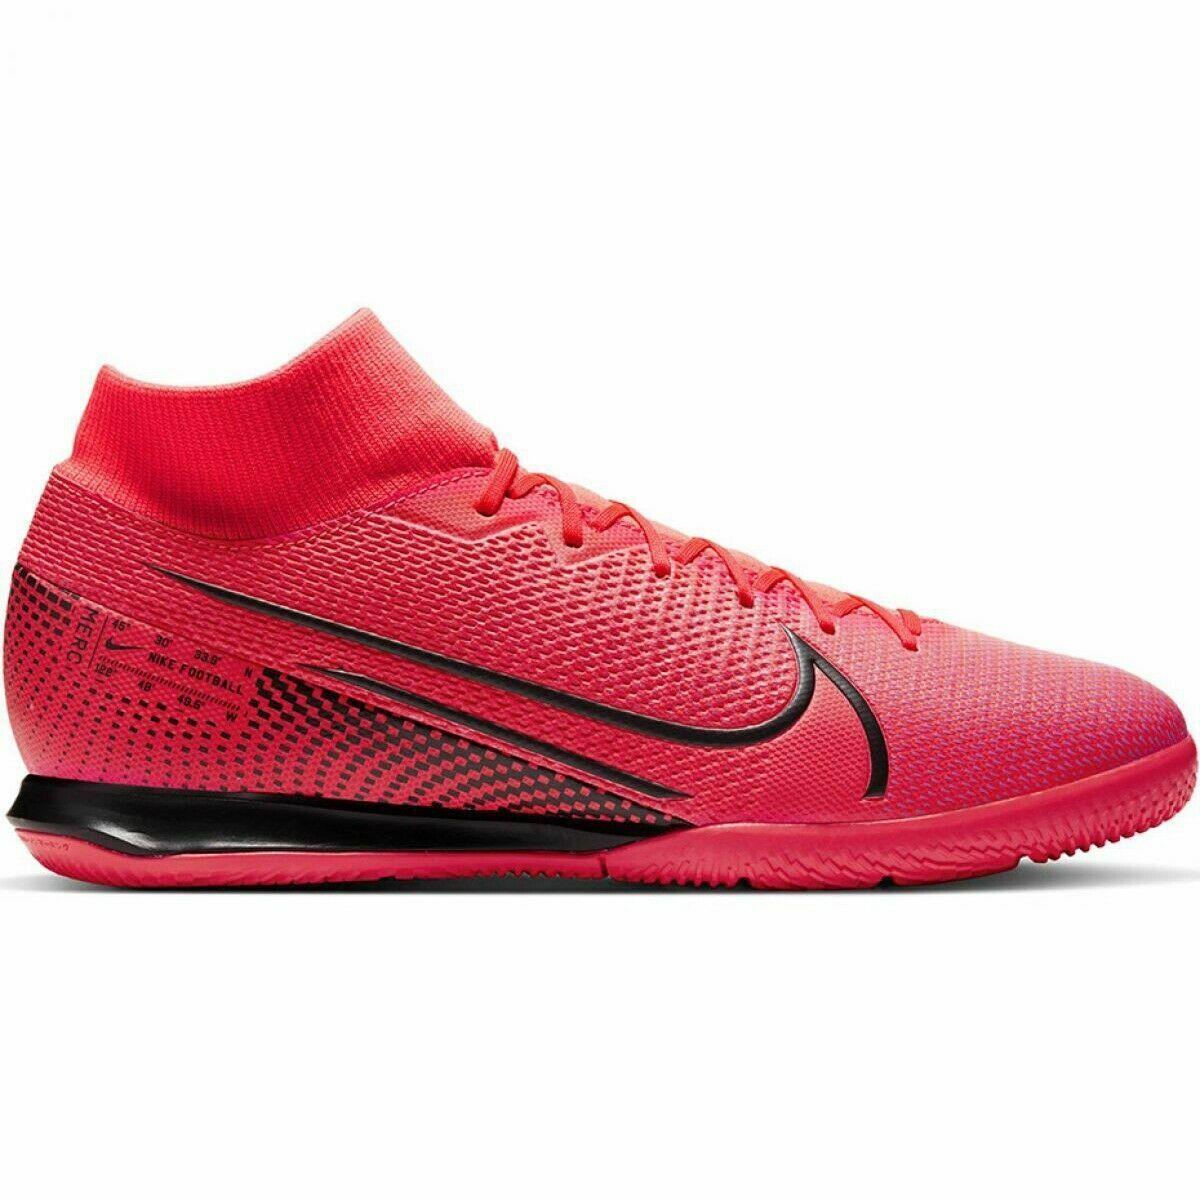 Nike Mercurial Superfly 7 Academy Ic M Indoor Shoes Red AT7975-606 Men`s Size 10